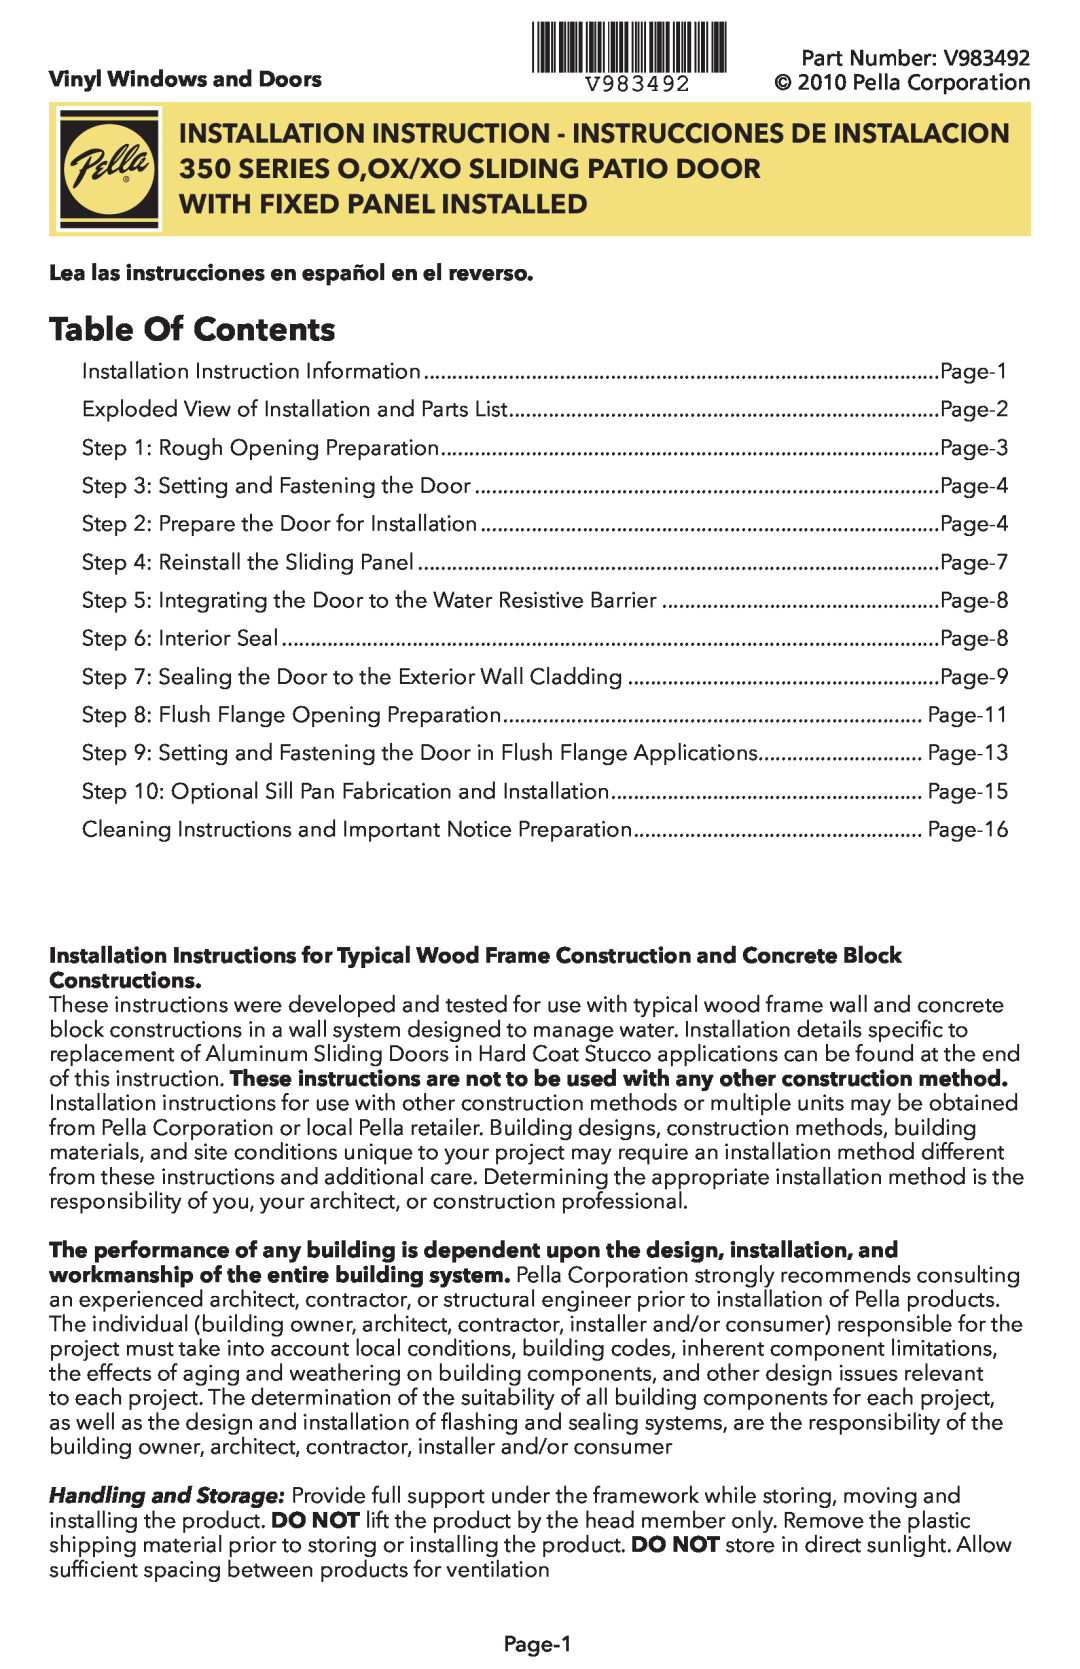 Pella V983492 installation instructions Table Of Contents, SERIES O,OX/XO SLIDINg PATIO DOOR, WITh fIXED PANEL INSTALLED 